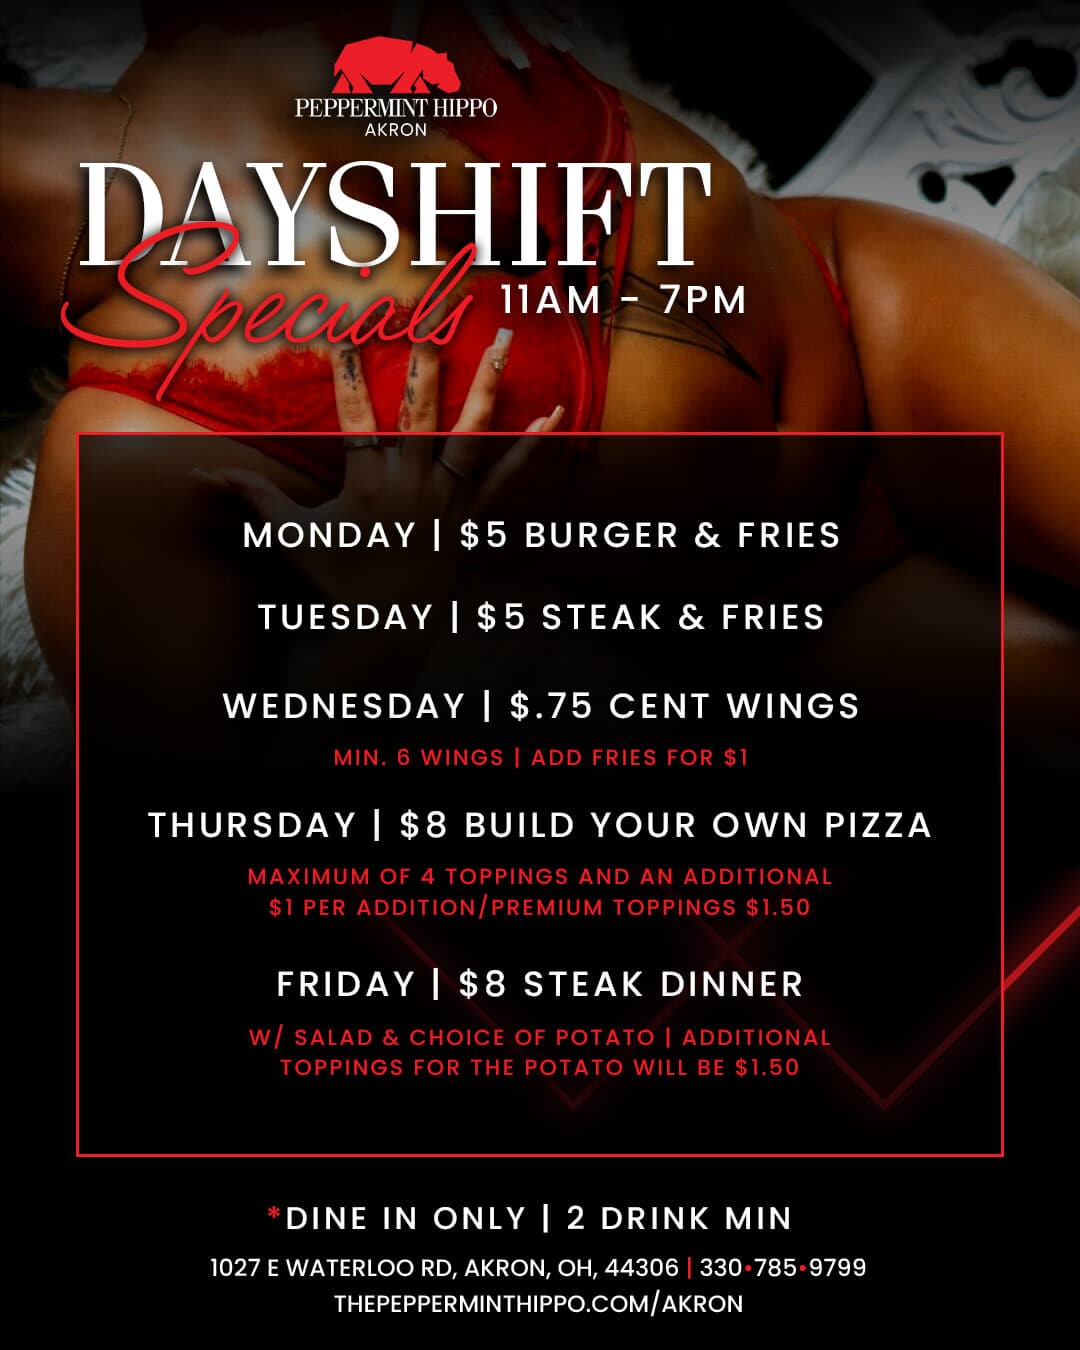 Dayshift Specials at Peppermint Hippo Akron